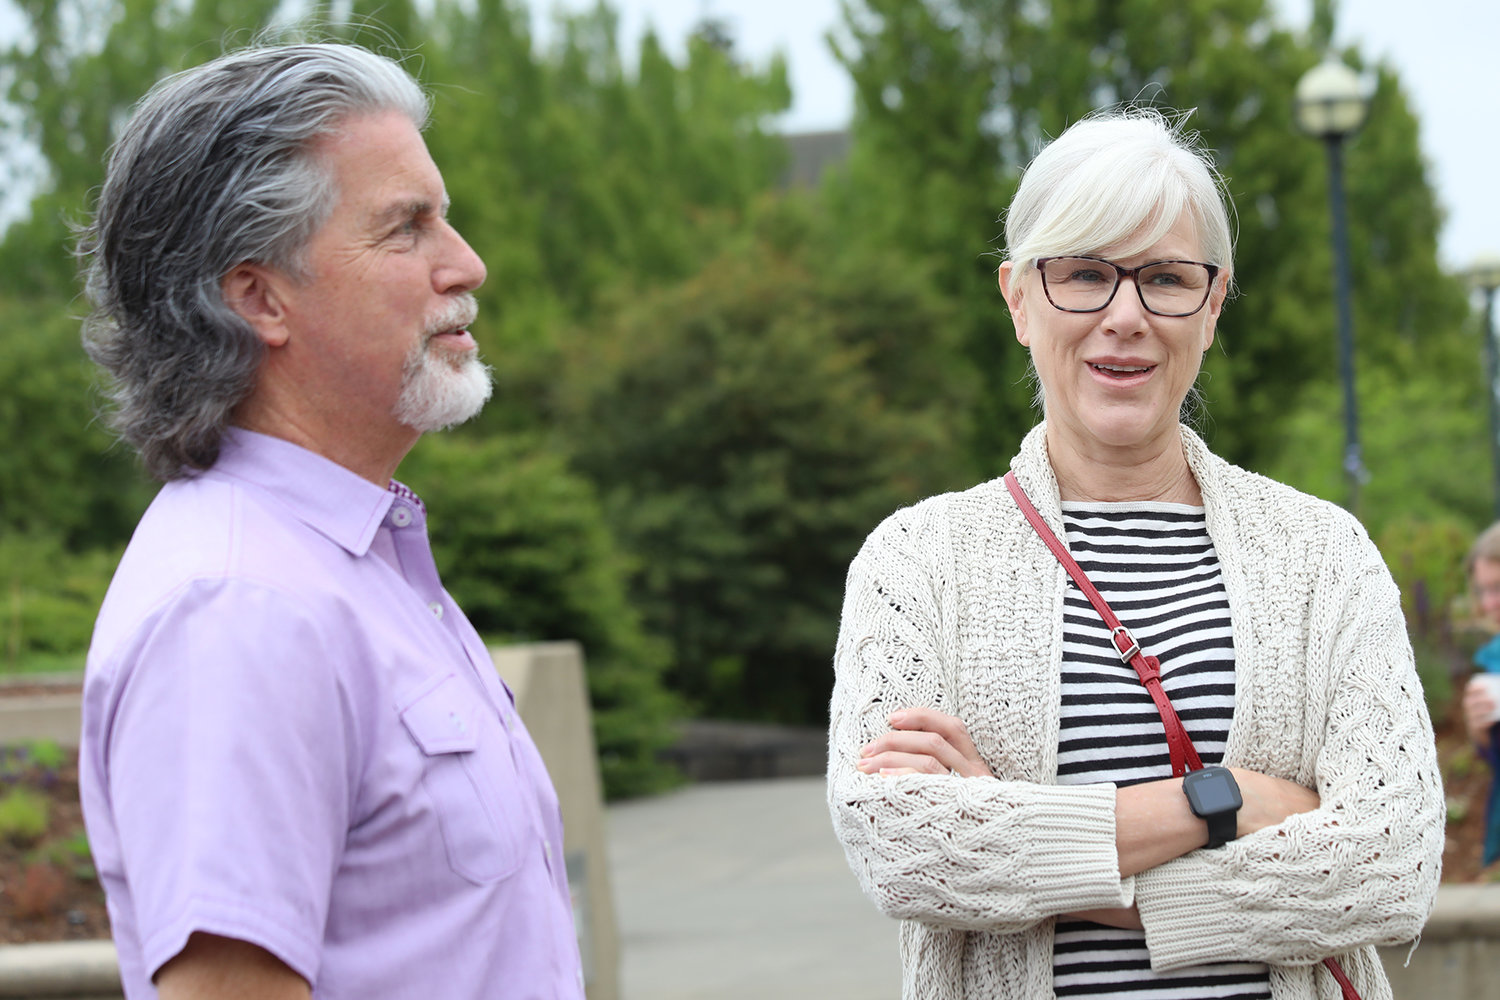 Kevin Pierce speaks with Olympia Mayor Cheryl Selby at the opening of the Capitol Campus Pollinator Garden on June 22, 2022.